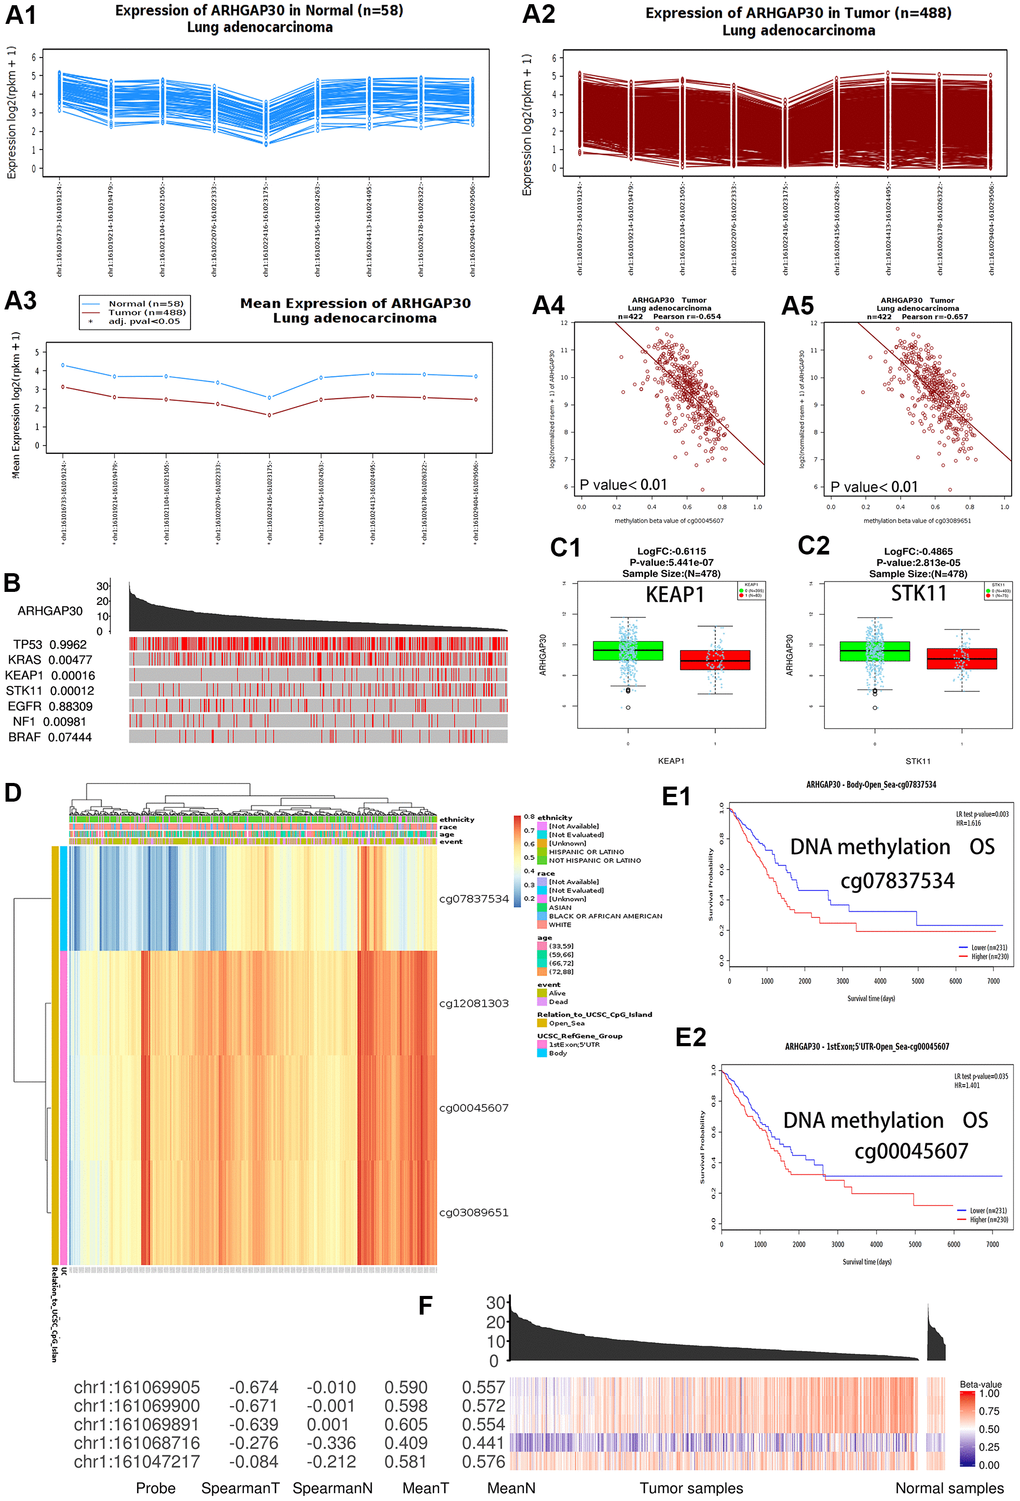 DNA methylation and the differential expression of ARHGAP30 between lung adenocarcinoma and normal tissues. (A) The abundance of the different exons of the ARHGAP30 gene shows an uneven balance in normal and tumor tissues in patients with lung adenocarcinoma according to the Wanderer database. (A1) Expression of ARHGAP30 in normal tissues (n = 58); (A2) Expression of ARHGAP30 in tumor tissues (n = 488); (A3) Comparison of the mean expression of ARHGAP30 between normal tissue and lung adenocarcinoma tissue. (A4, A5) The expression of ARHGAP30 correlated negatively with the level of DNA methylation. (B) Highly mutated genes and the expression of ARHGAP30 in the TCGAportal database. The value adjacent to the highly mutated gene is the permutation test p-value of gene expression between the driver mutated (red) and not-mutated (gray) samples. (C1, C2) Box plots of the mRNA expression of ARHGAP30 in lung adenocarcinoma before and after mutation of highly mutated genes (KEAP1, STK11) in the Linkedomics database. (D) Heat map of ARHGAP30 methylation in lung adenocarcinoma. (E1, E2) Kaplan–Meier plots of the survival of patients with lung adenocarcinoma with different ARHGAP30 DNA methylation levels (Different methylation probes cg07837534 and cg00045607 in the MethSurv database). (F) Gene expression and methylation of ARHGAP30 in samples of primary tumors and solid tissues analyzed at the TCGAportal database. Spearman T: Spearman correlation between expression and methylation in primary tumor samples. Spearman N: Spearman correlation between expression and methylation in solid tissue standard samples. Mean T: Mean value of the methylation beta-value in primary tumor samples. Mean N: Mean value of methylation in normal solid tissue samples.